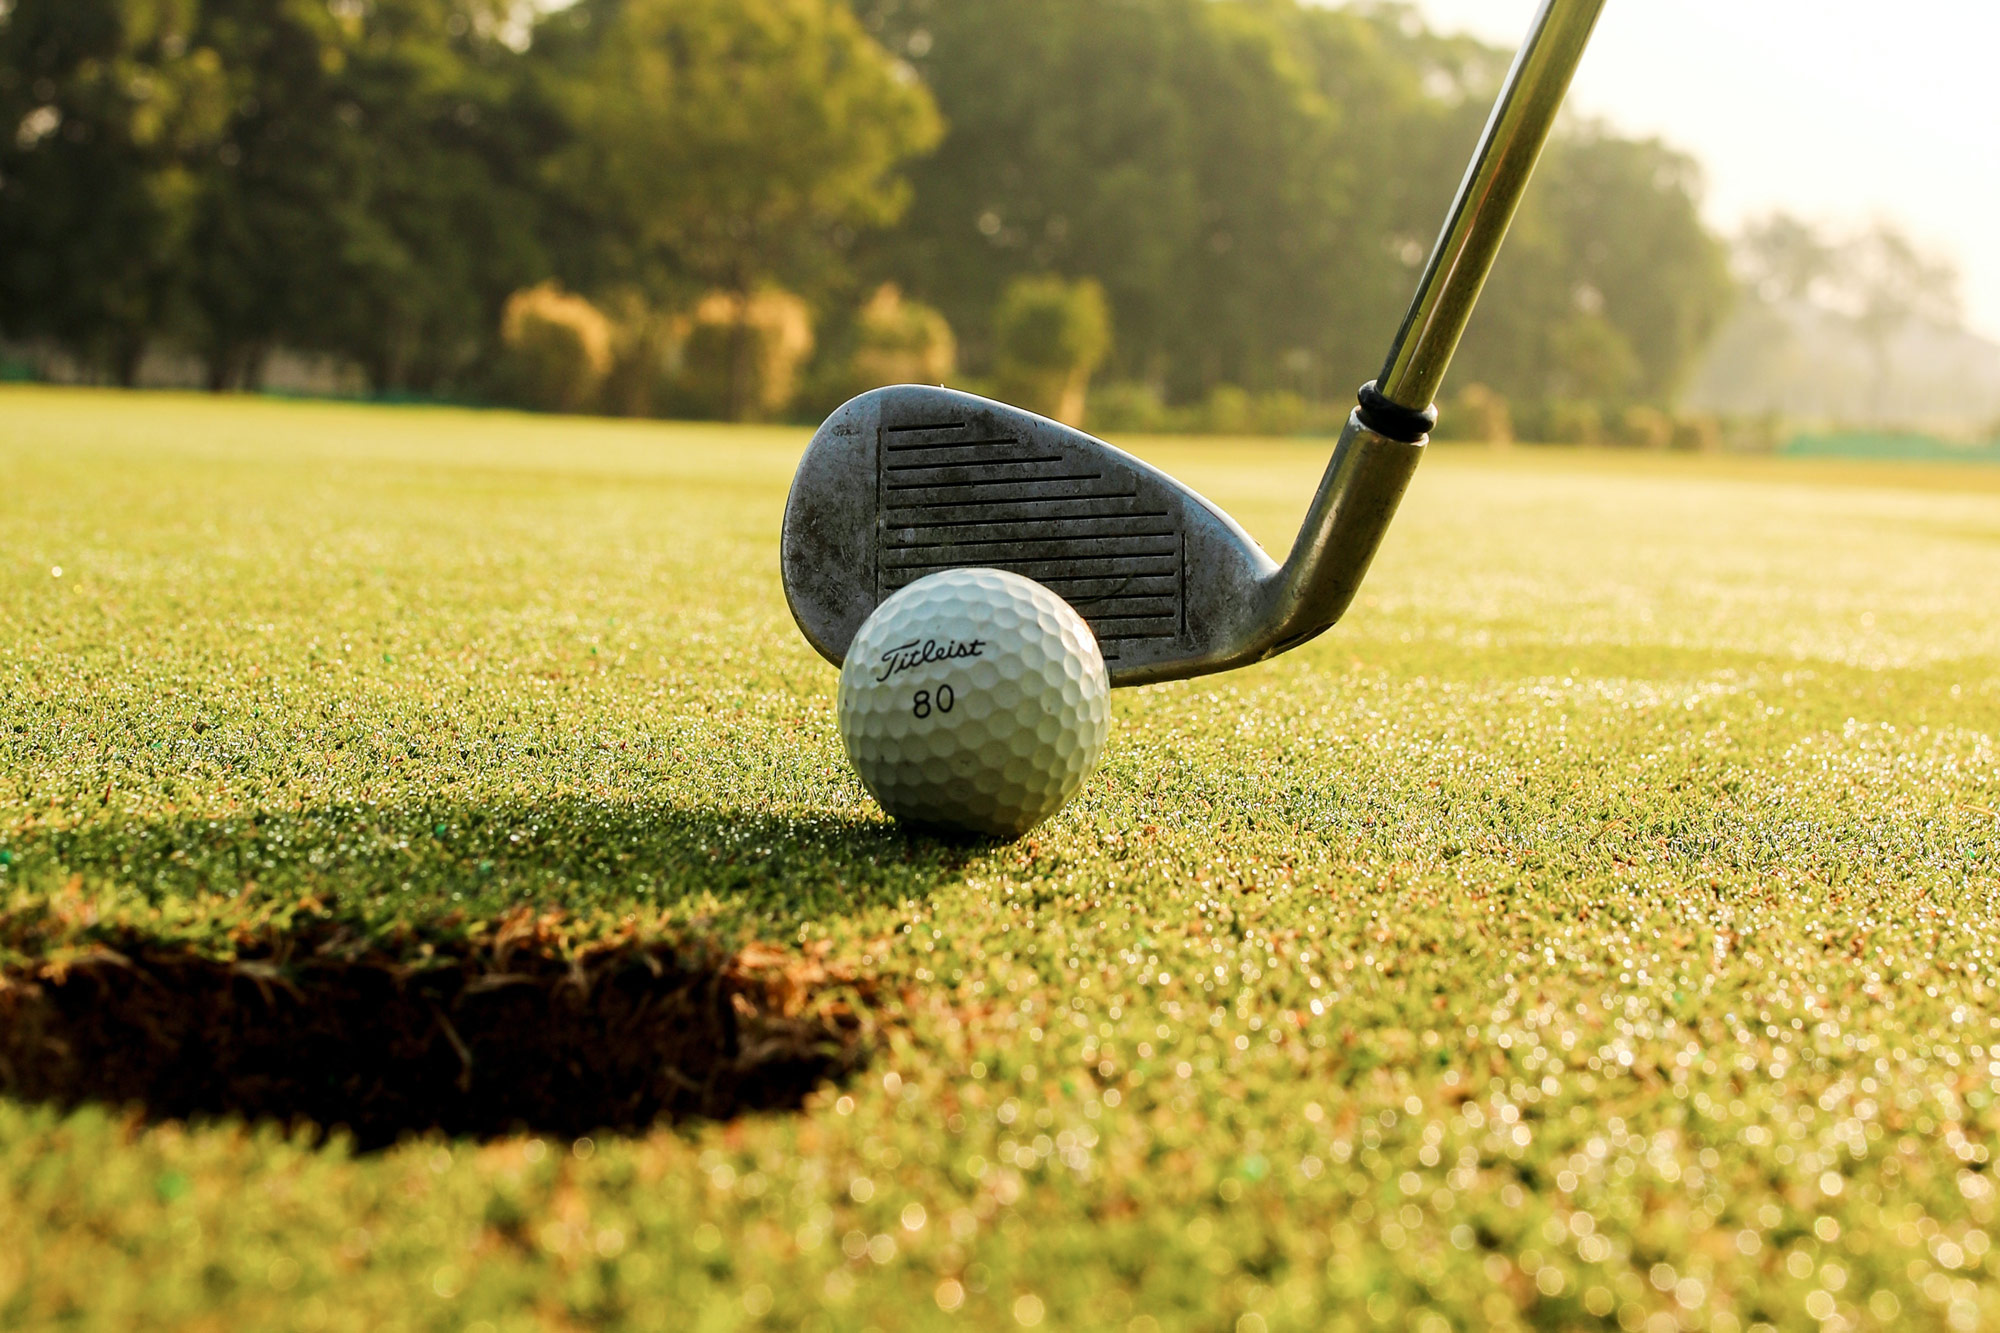 Sunshore Golf Course: The Sunshore Golf Course is a beautifully kept 9 hole course described as the jewel of the village. With a par 32, this course is ideal for families and affordable […]